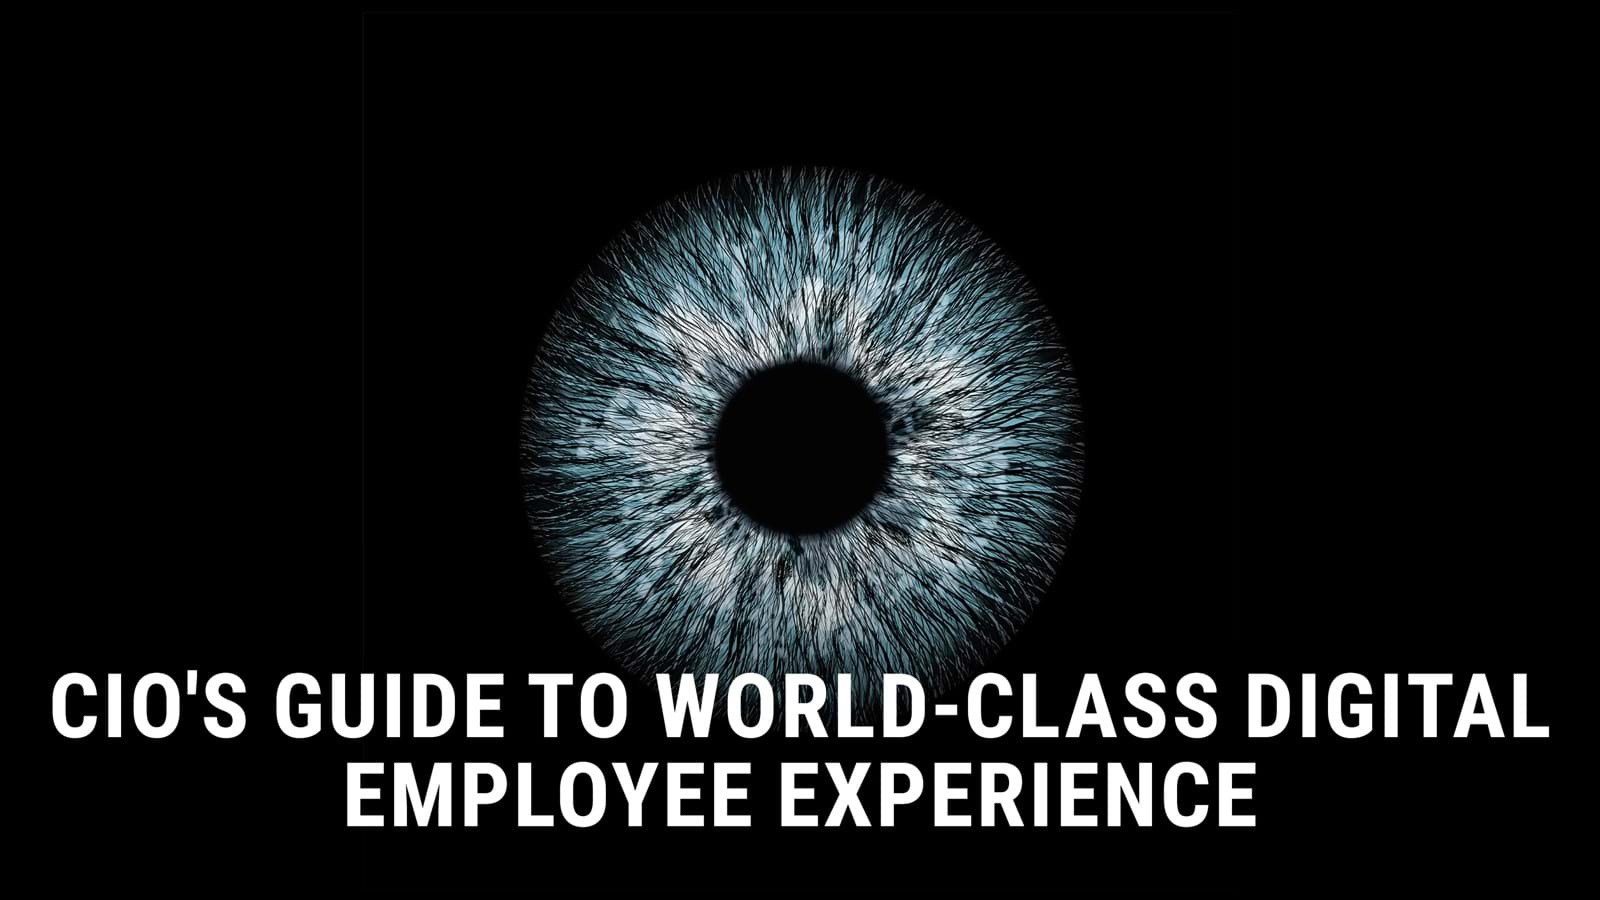 'CIO's guide to world-class digital employee experience' guide front cover